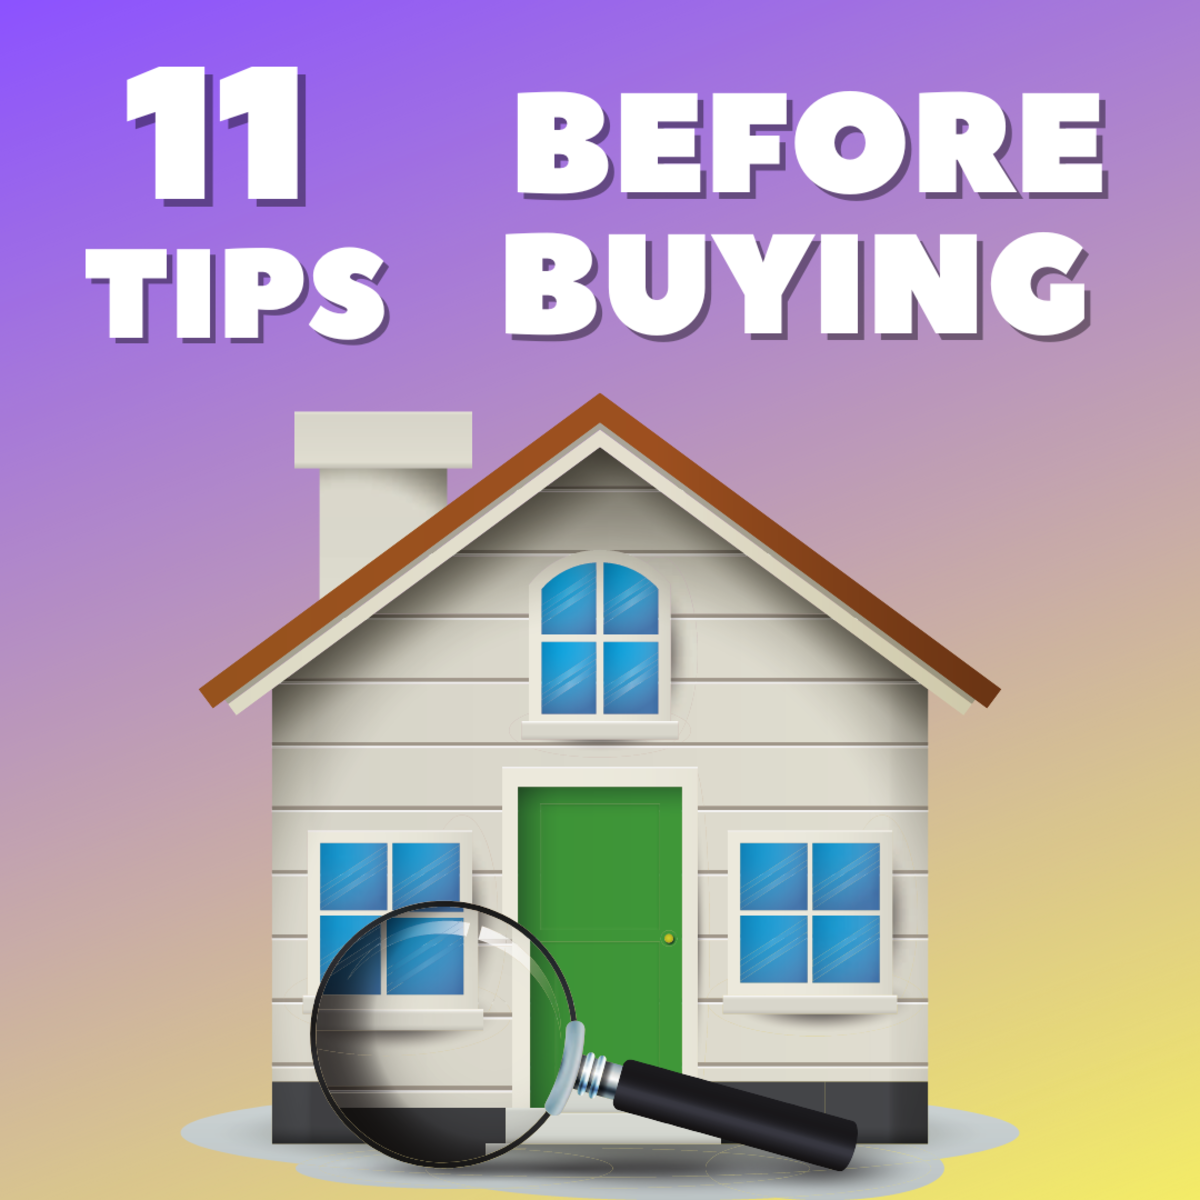 11 Things You Must Know Before Buying a House